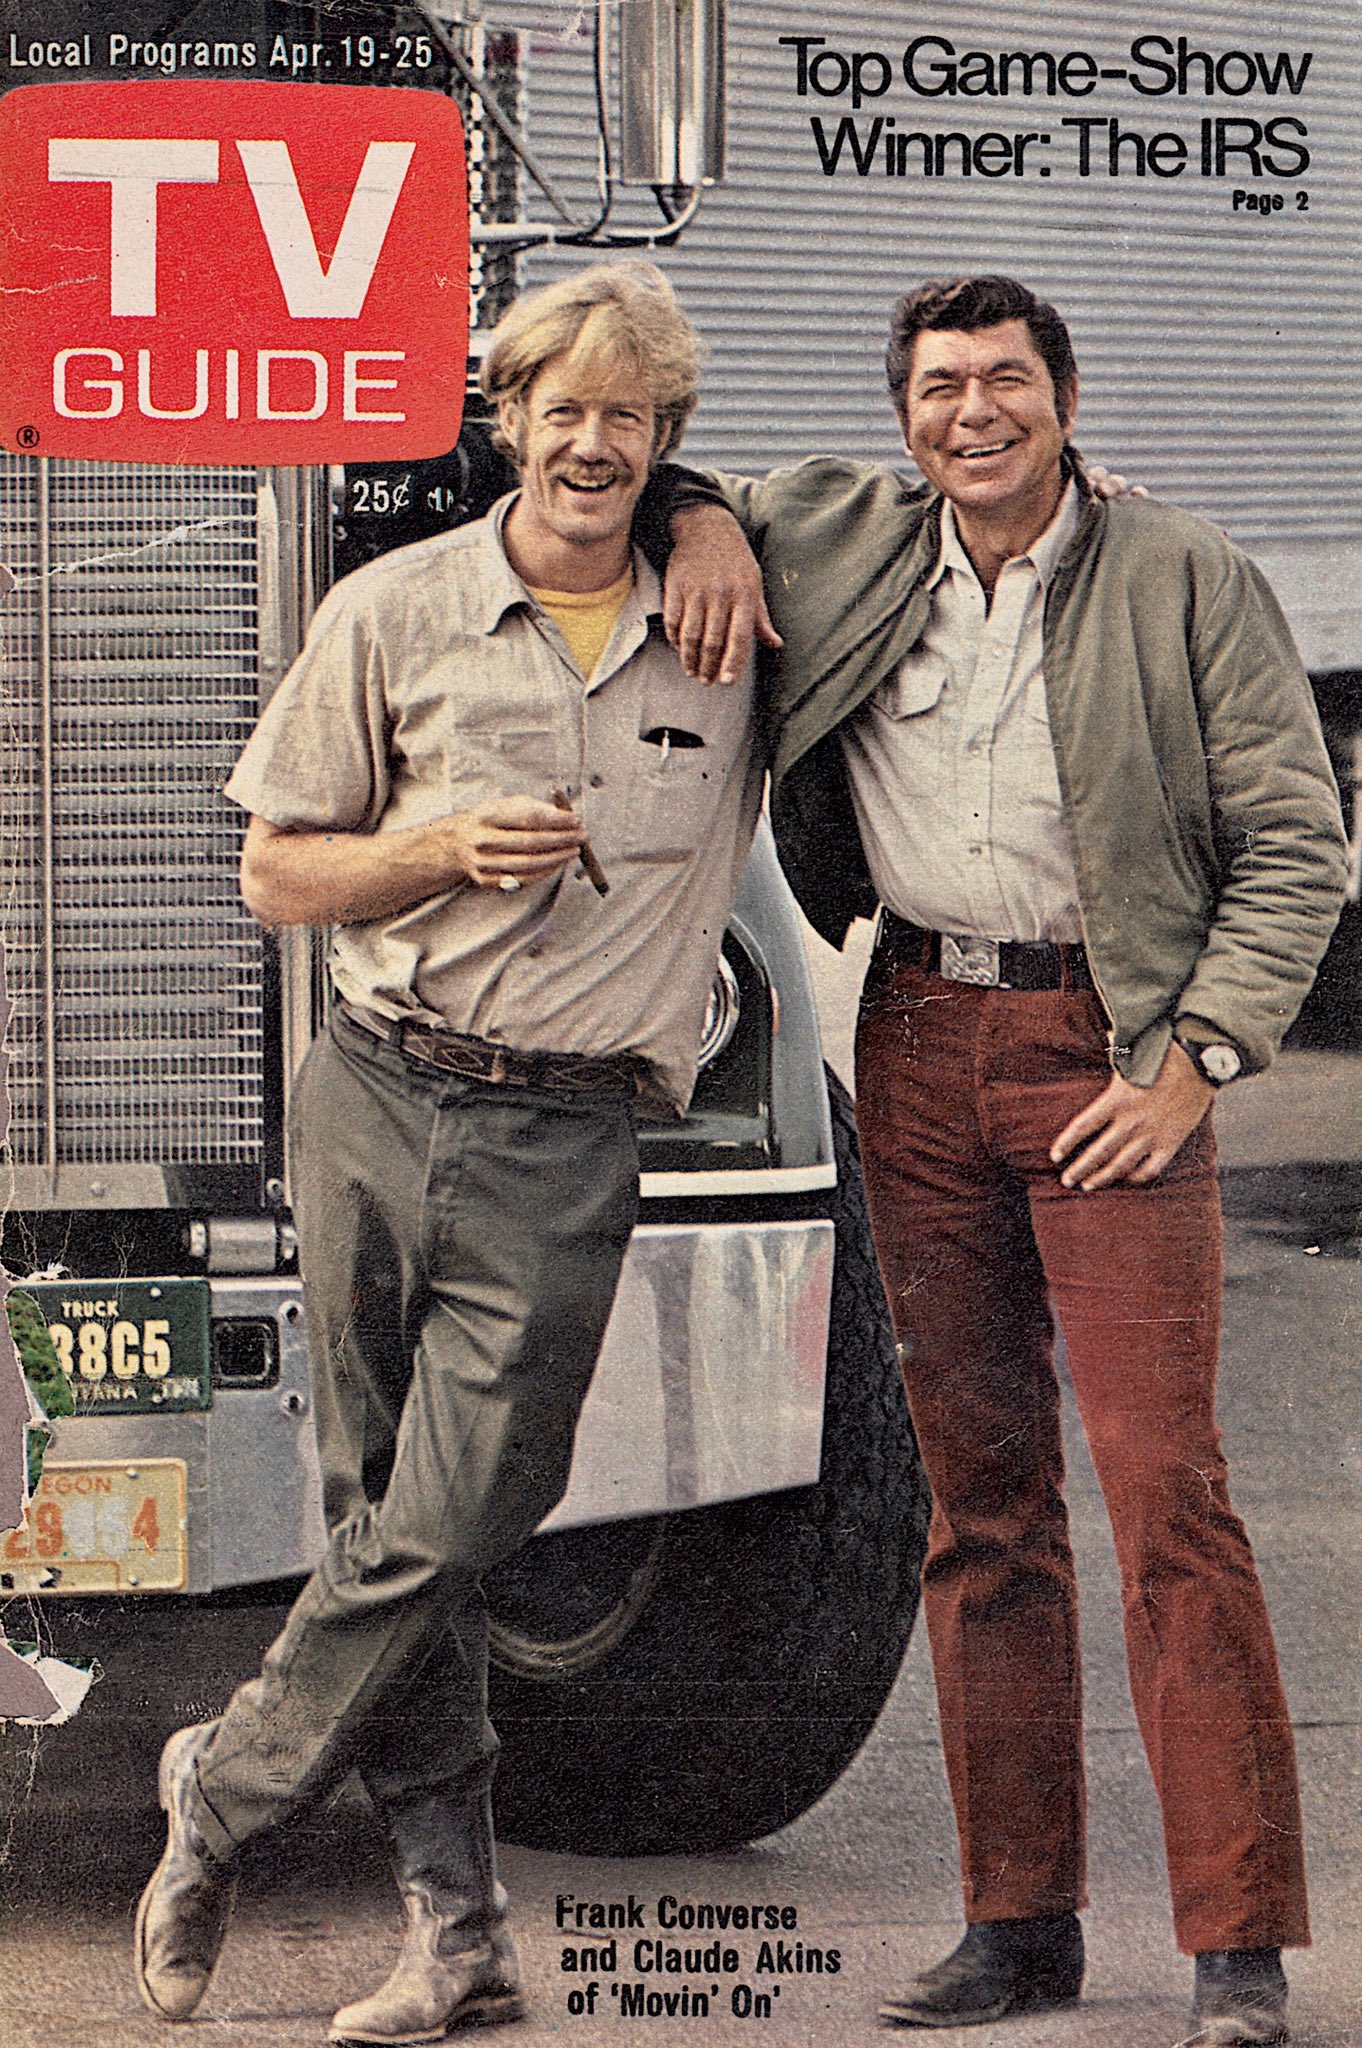 fluir animación izquierda RetroNewsNow on Twitter: "TV Guide Cover, April 19-25, 1975: Frank Converse  and Claude Akins of 'Movin' On' https://t.co/BWF1p1HCmO" / Twitter